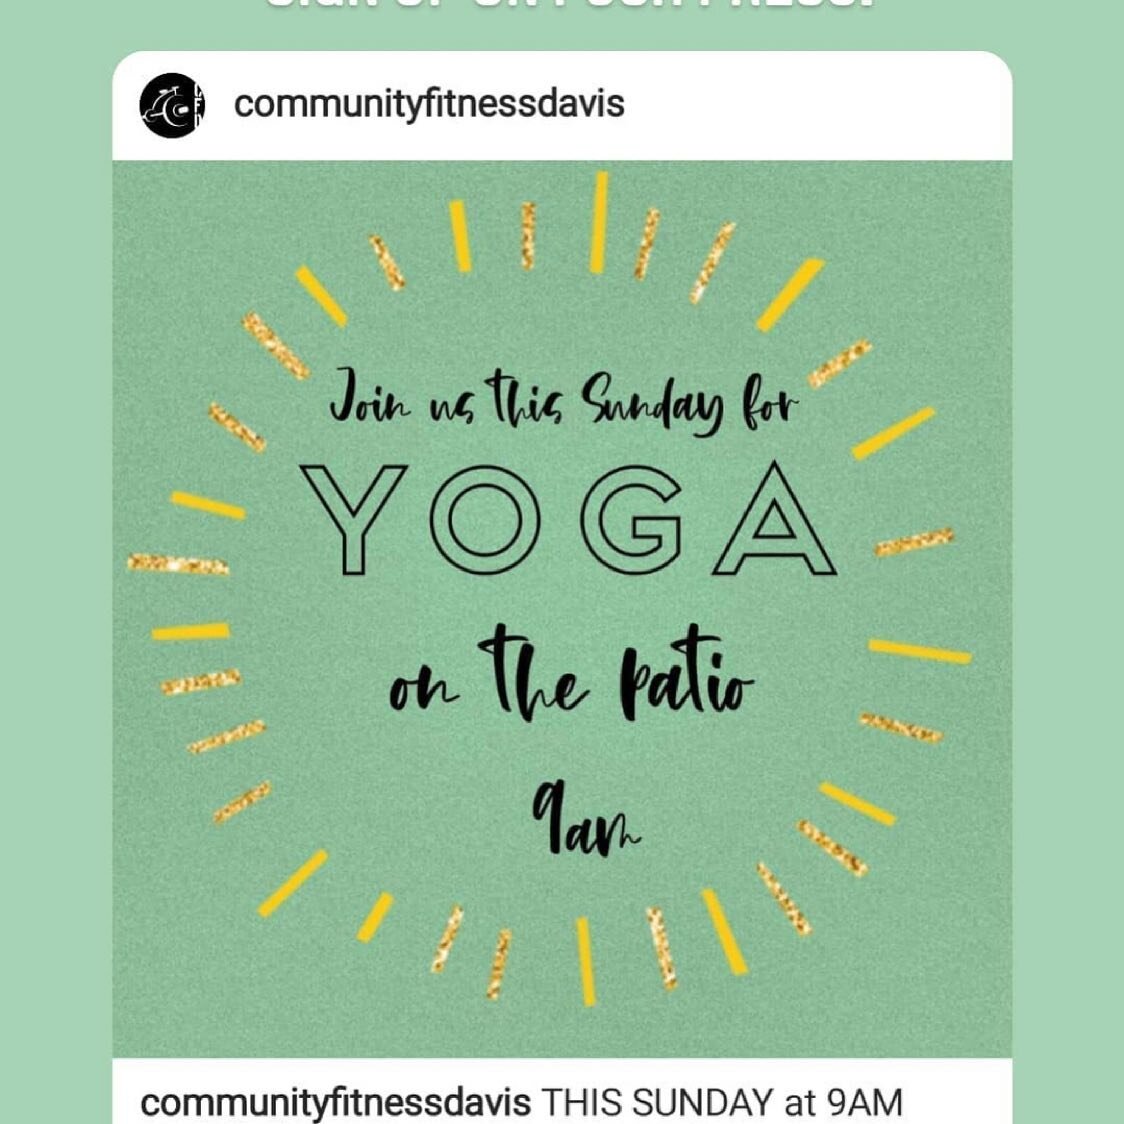 Back in person tomorrow on the patio @communityfitnessdavis  Sign up on Push Press!!
9am bring your yoga mat and props.  See you soon #focusedpathcoaching #yogaforcfders #yogaoutside #revive #breathe #🙏🏼